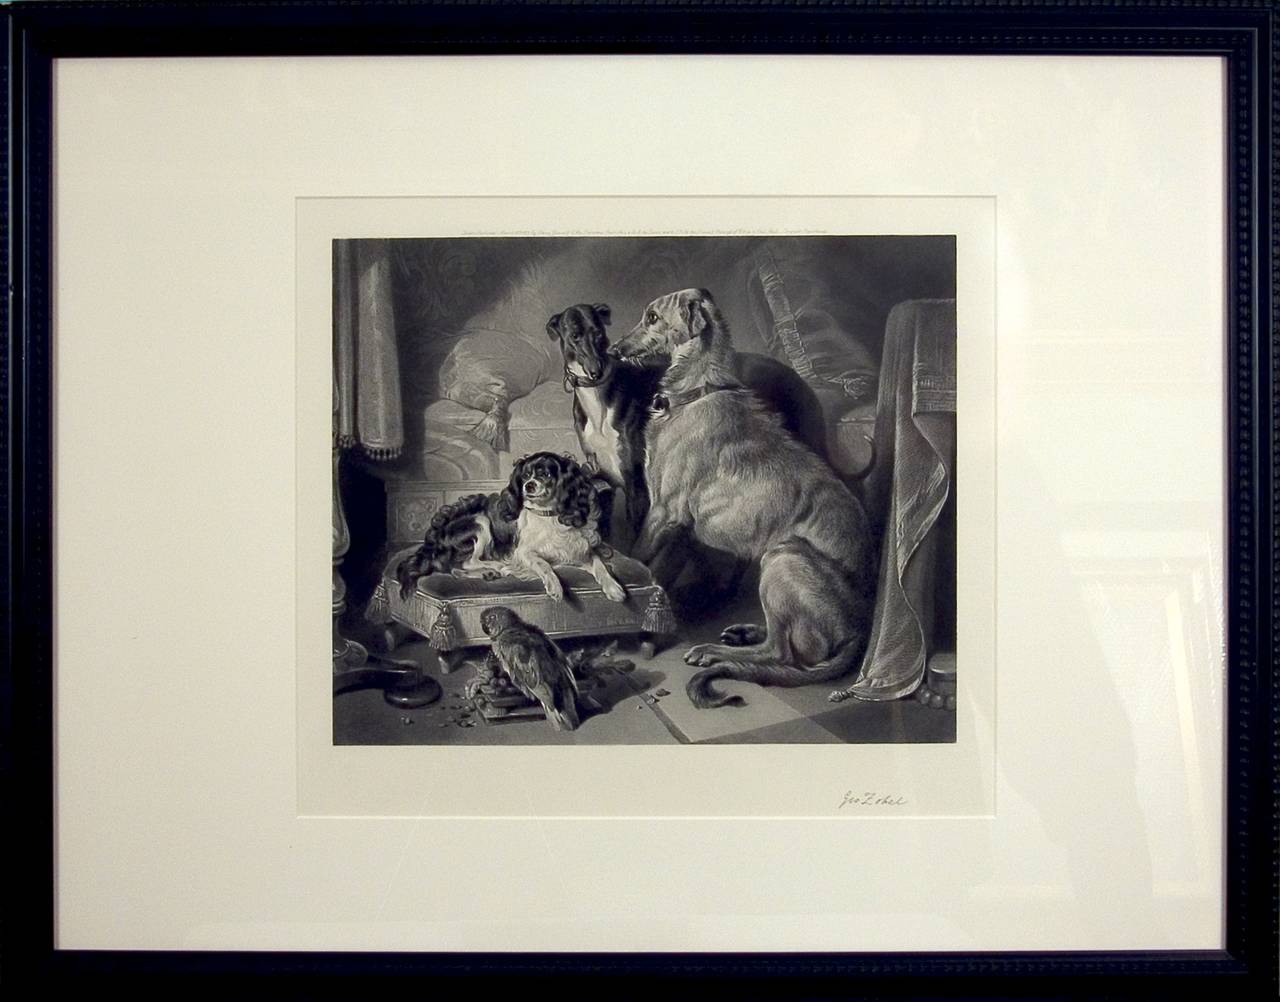 Sir Edwin Landseer Animal Print - Queen Victoria’s Favorite Pets, published March 15, 1877